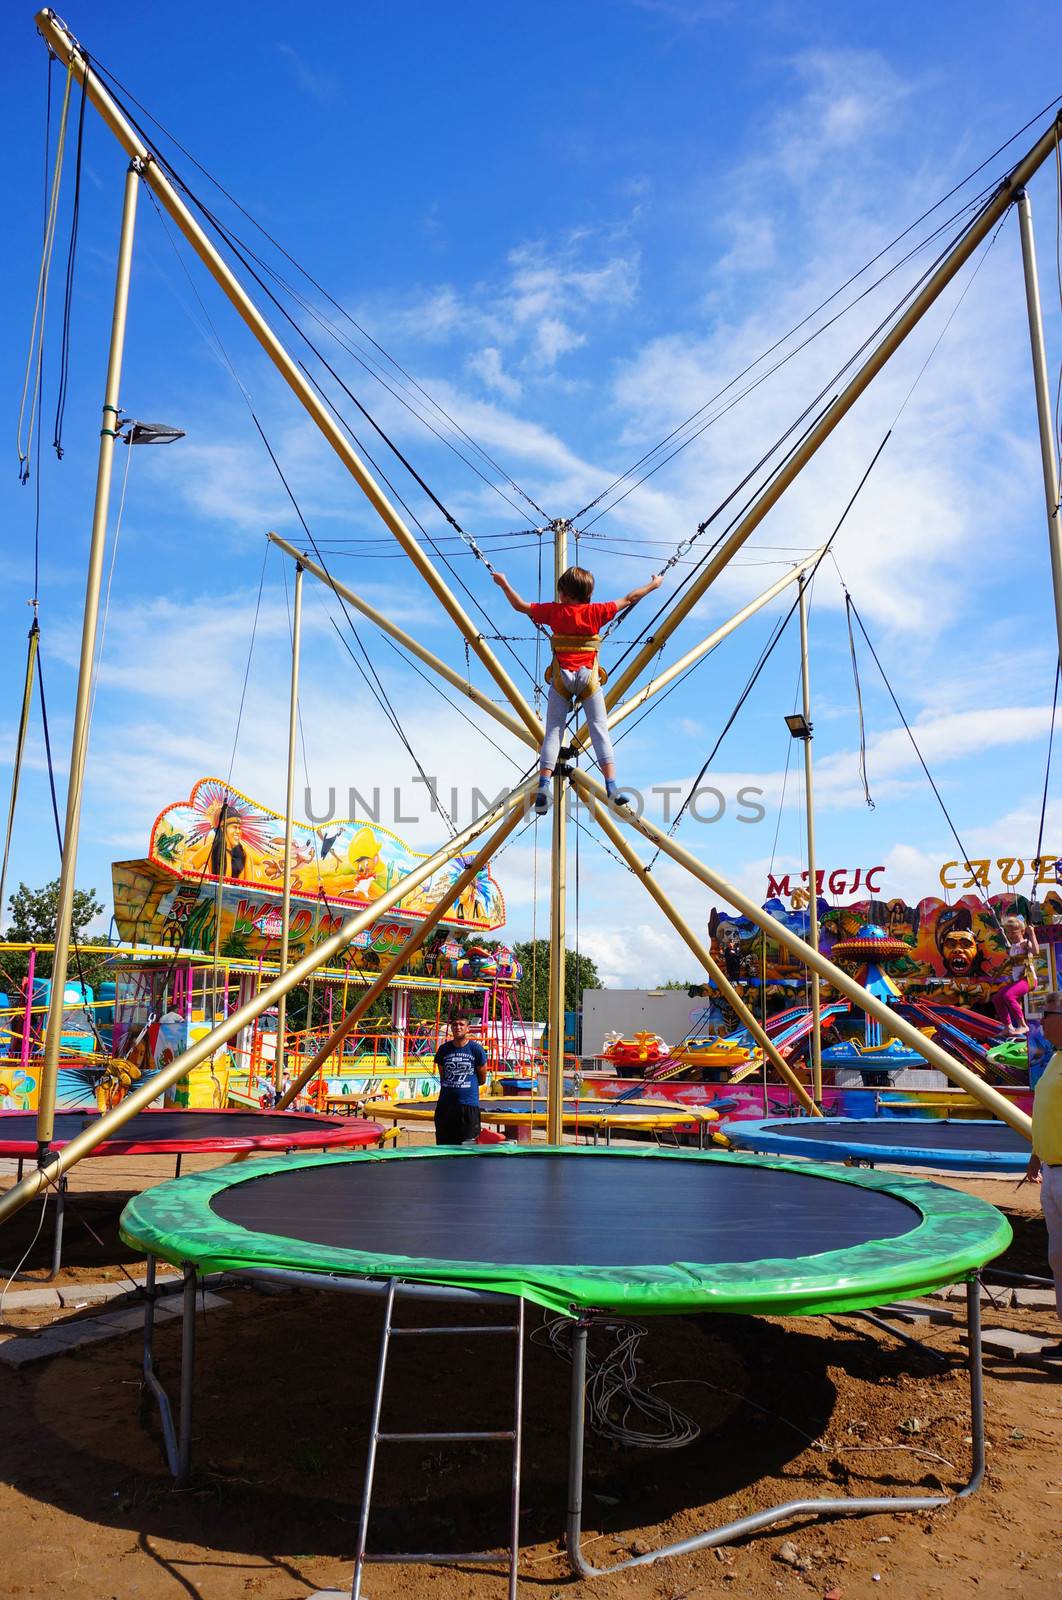 USTRONIE MORSKIE, POLAND - JULY 20, 2015: Tied child jumping on a trampolin at a fair